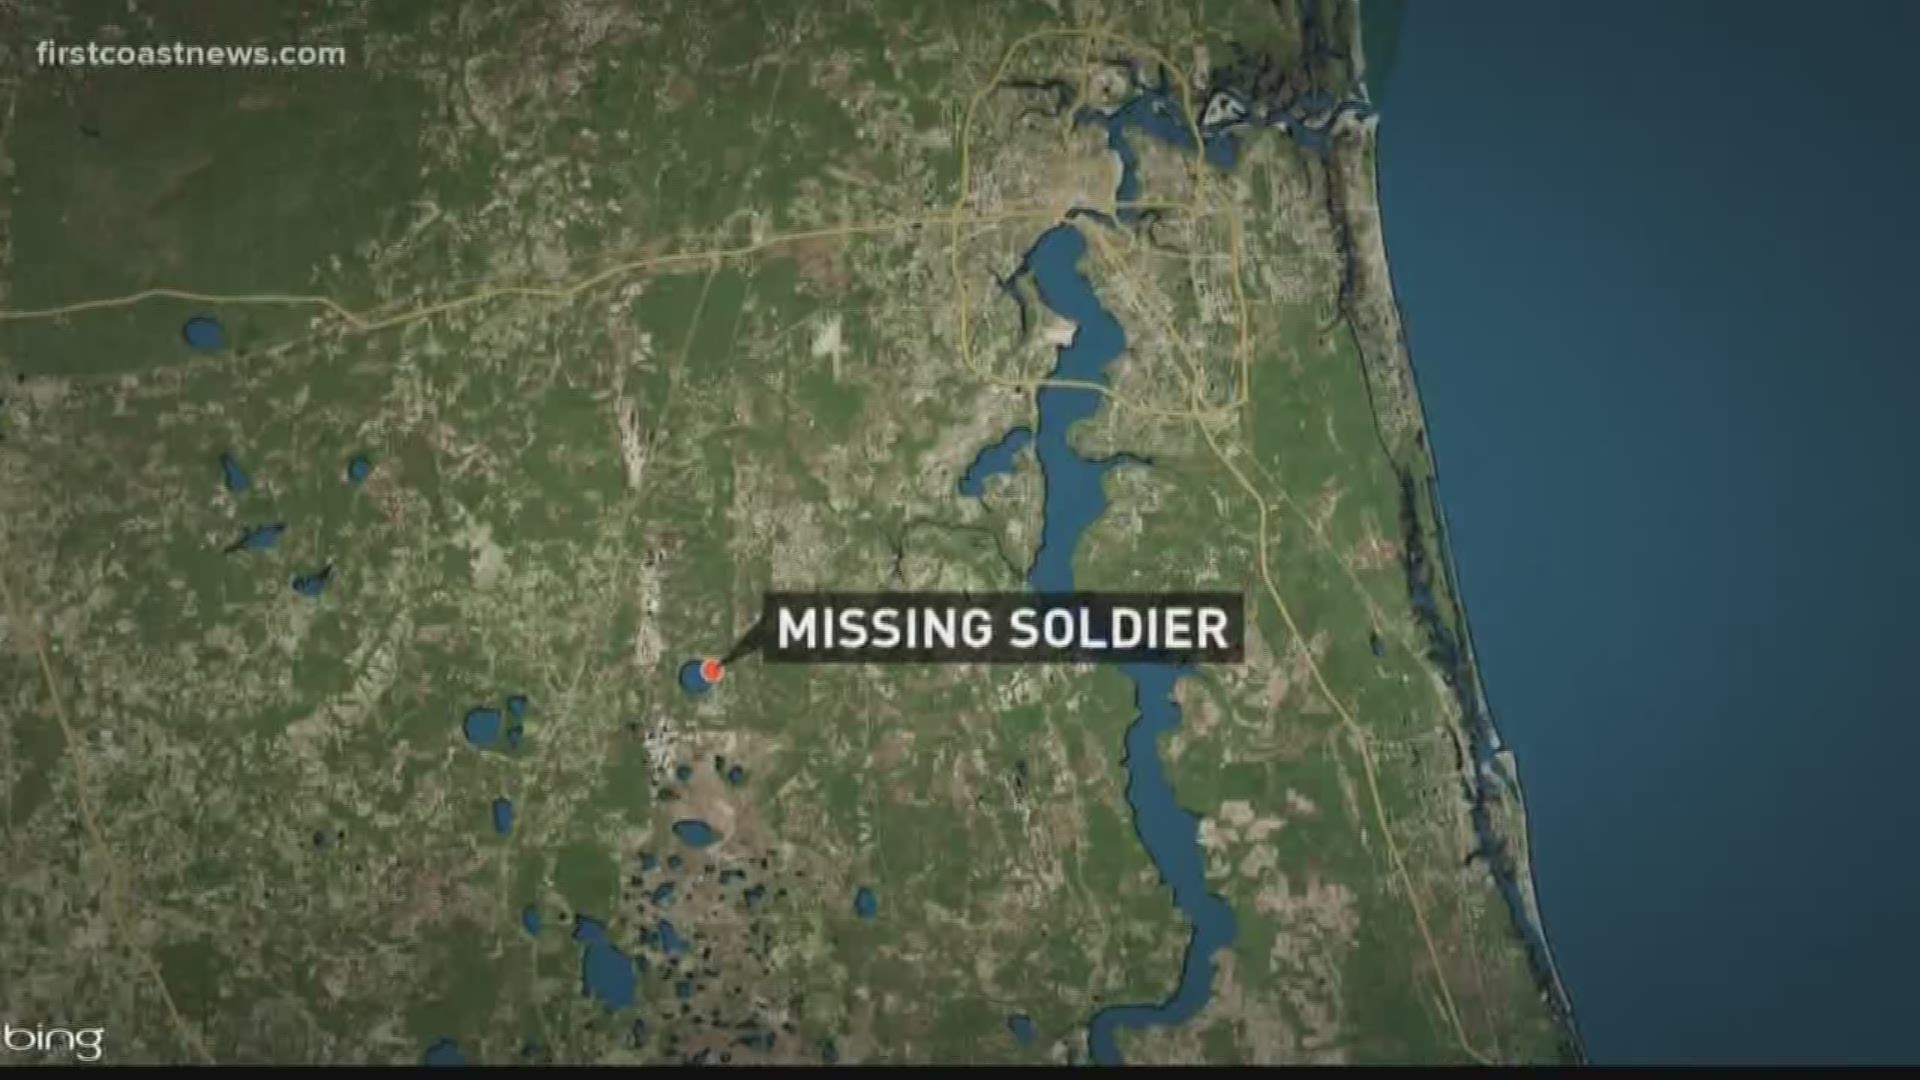 The search is on for a soldier from Camp Blanding who has been reported missing since Wednesday.